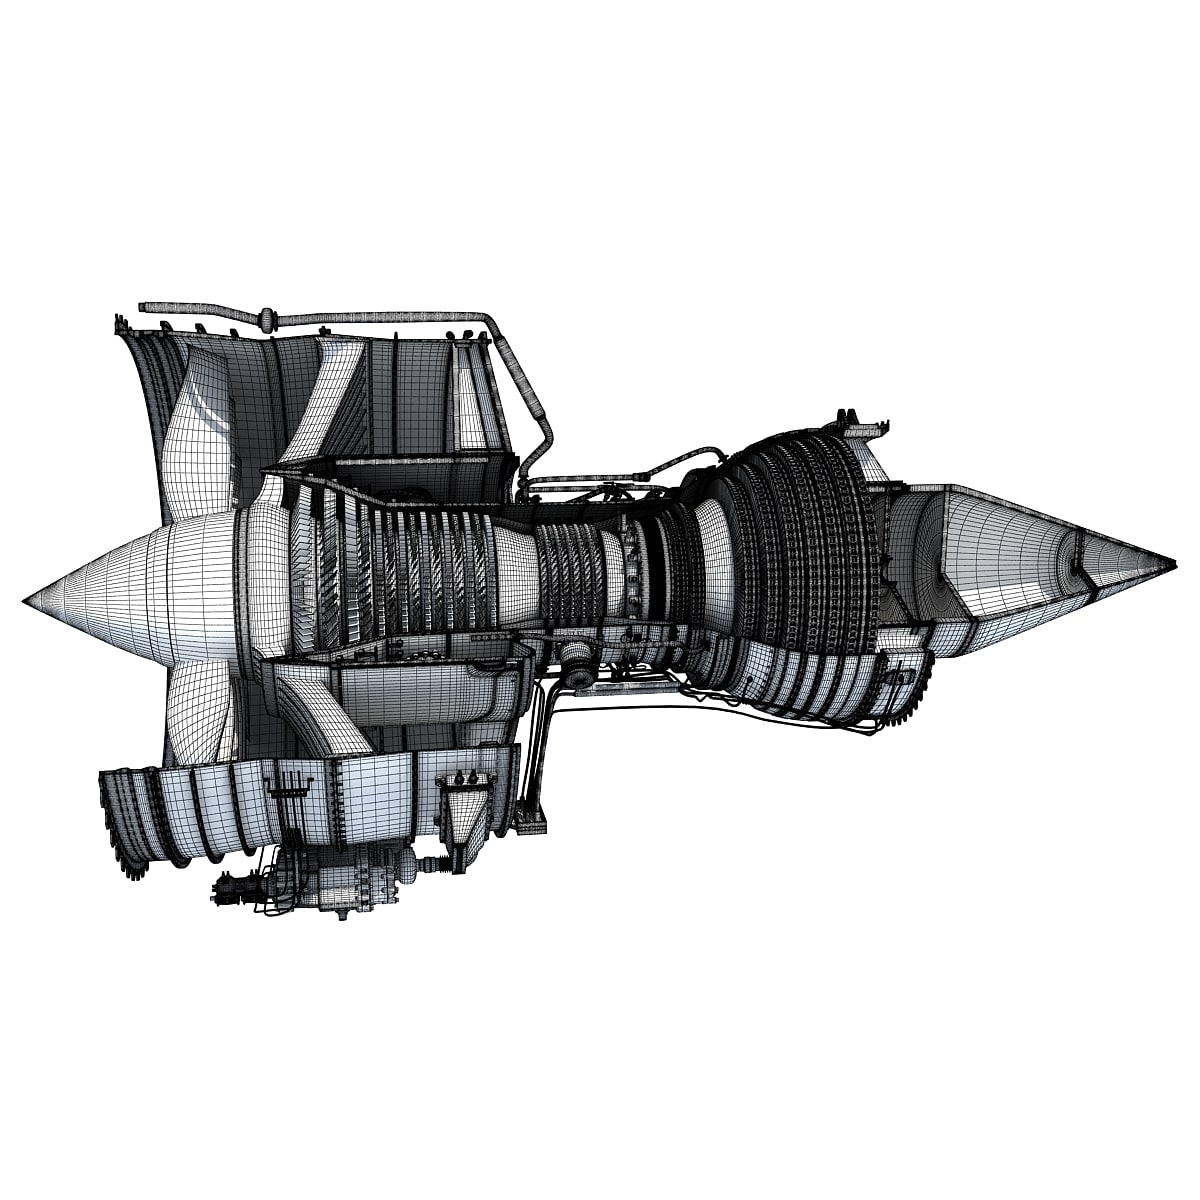 3D Model Sectioned Turbojet Engines